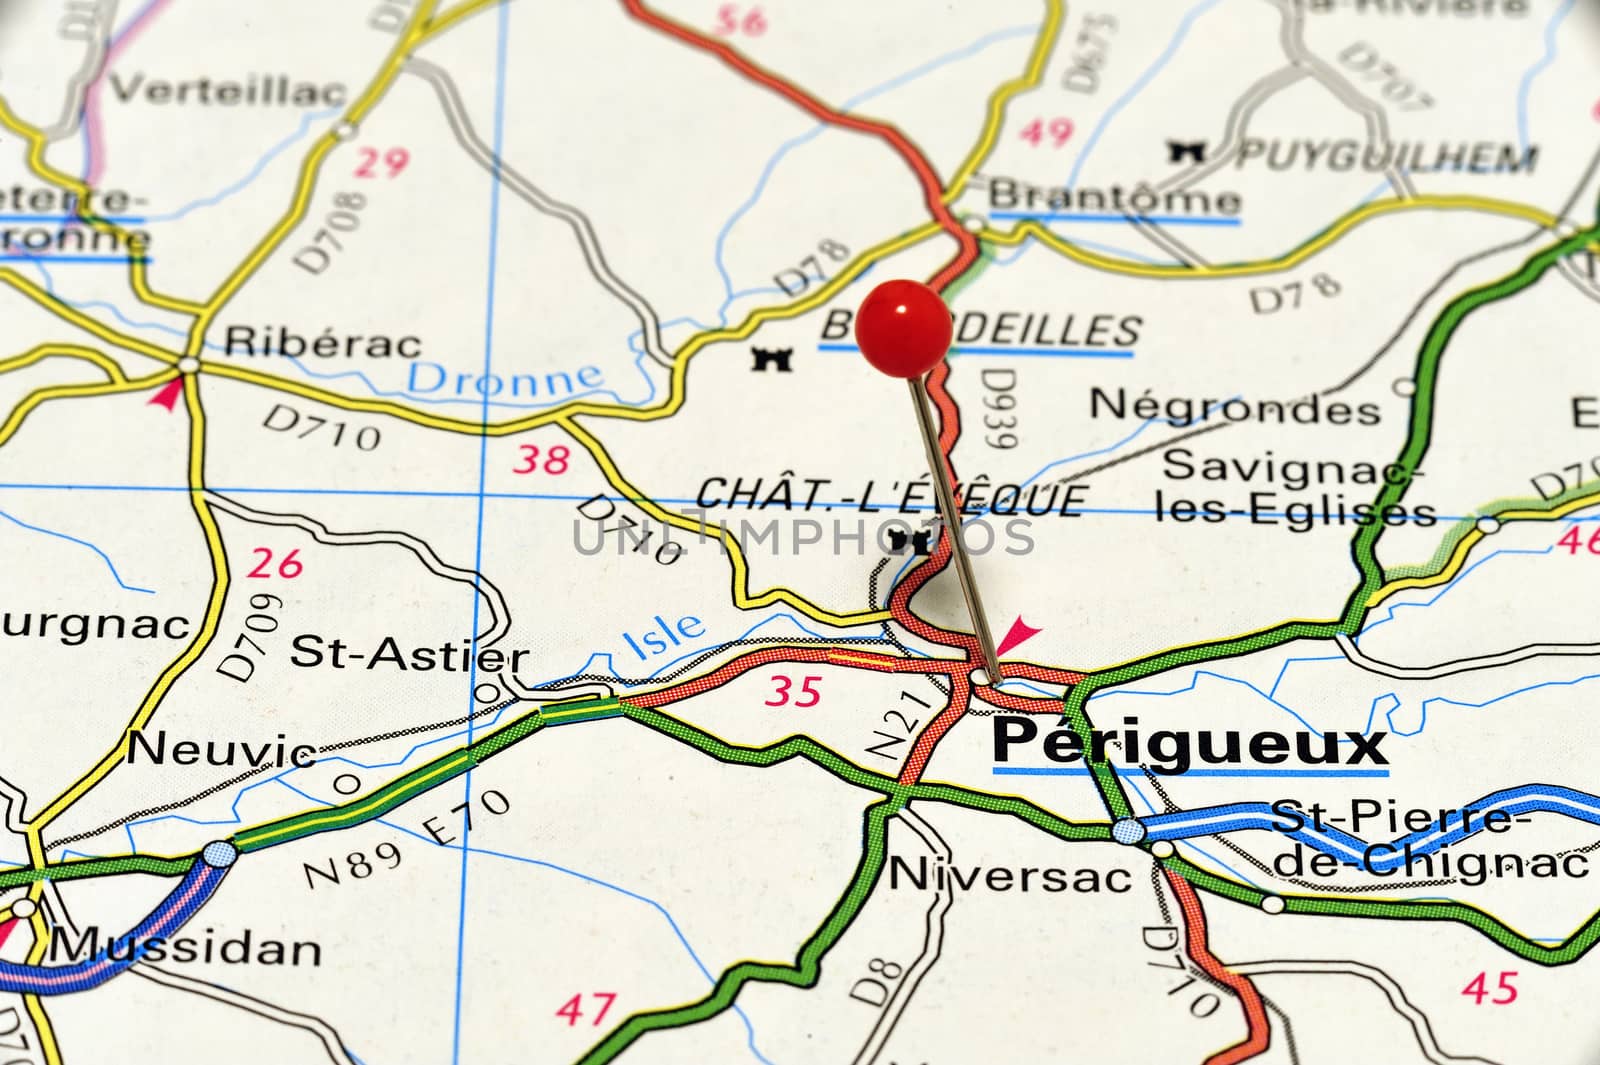 Closeup map of Périgueux. Périgueux is the regional capital of the department of Dordogne in south-eastern France.